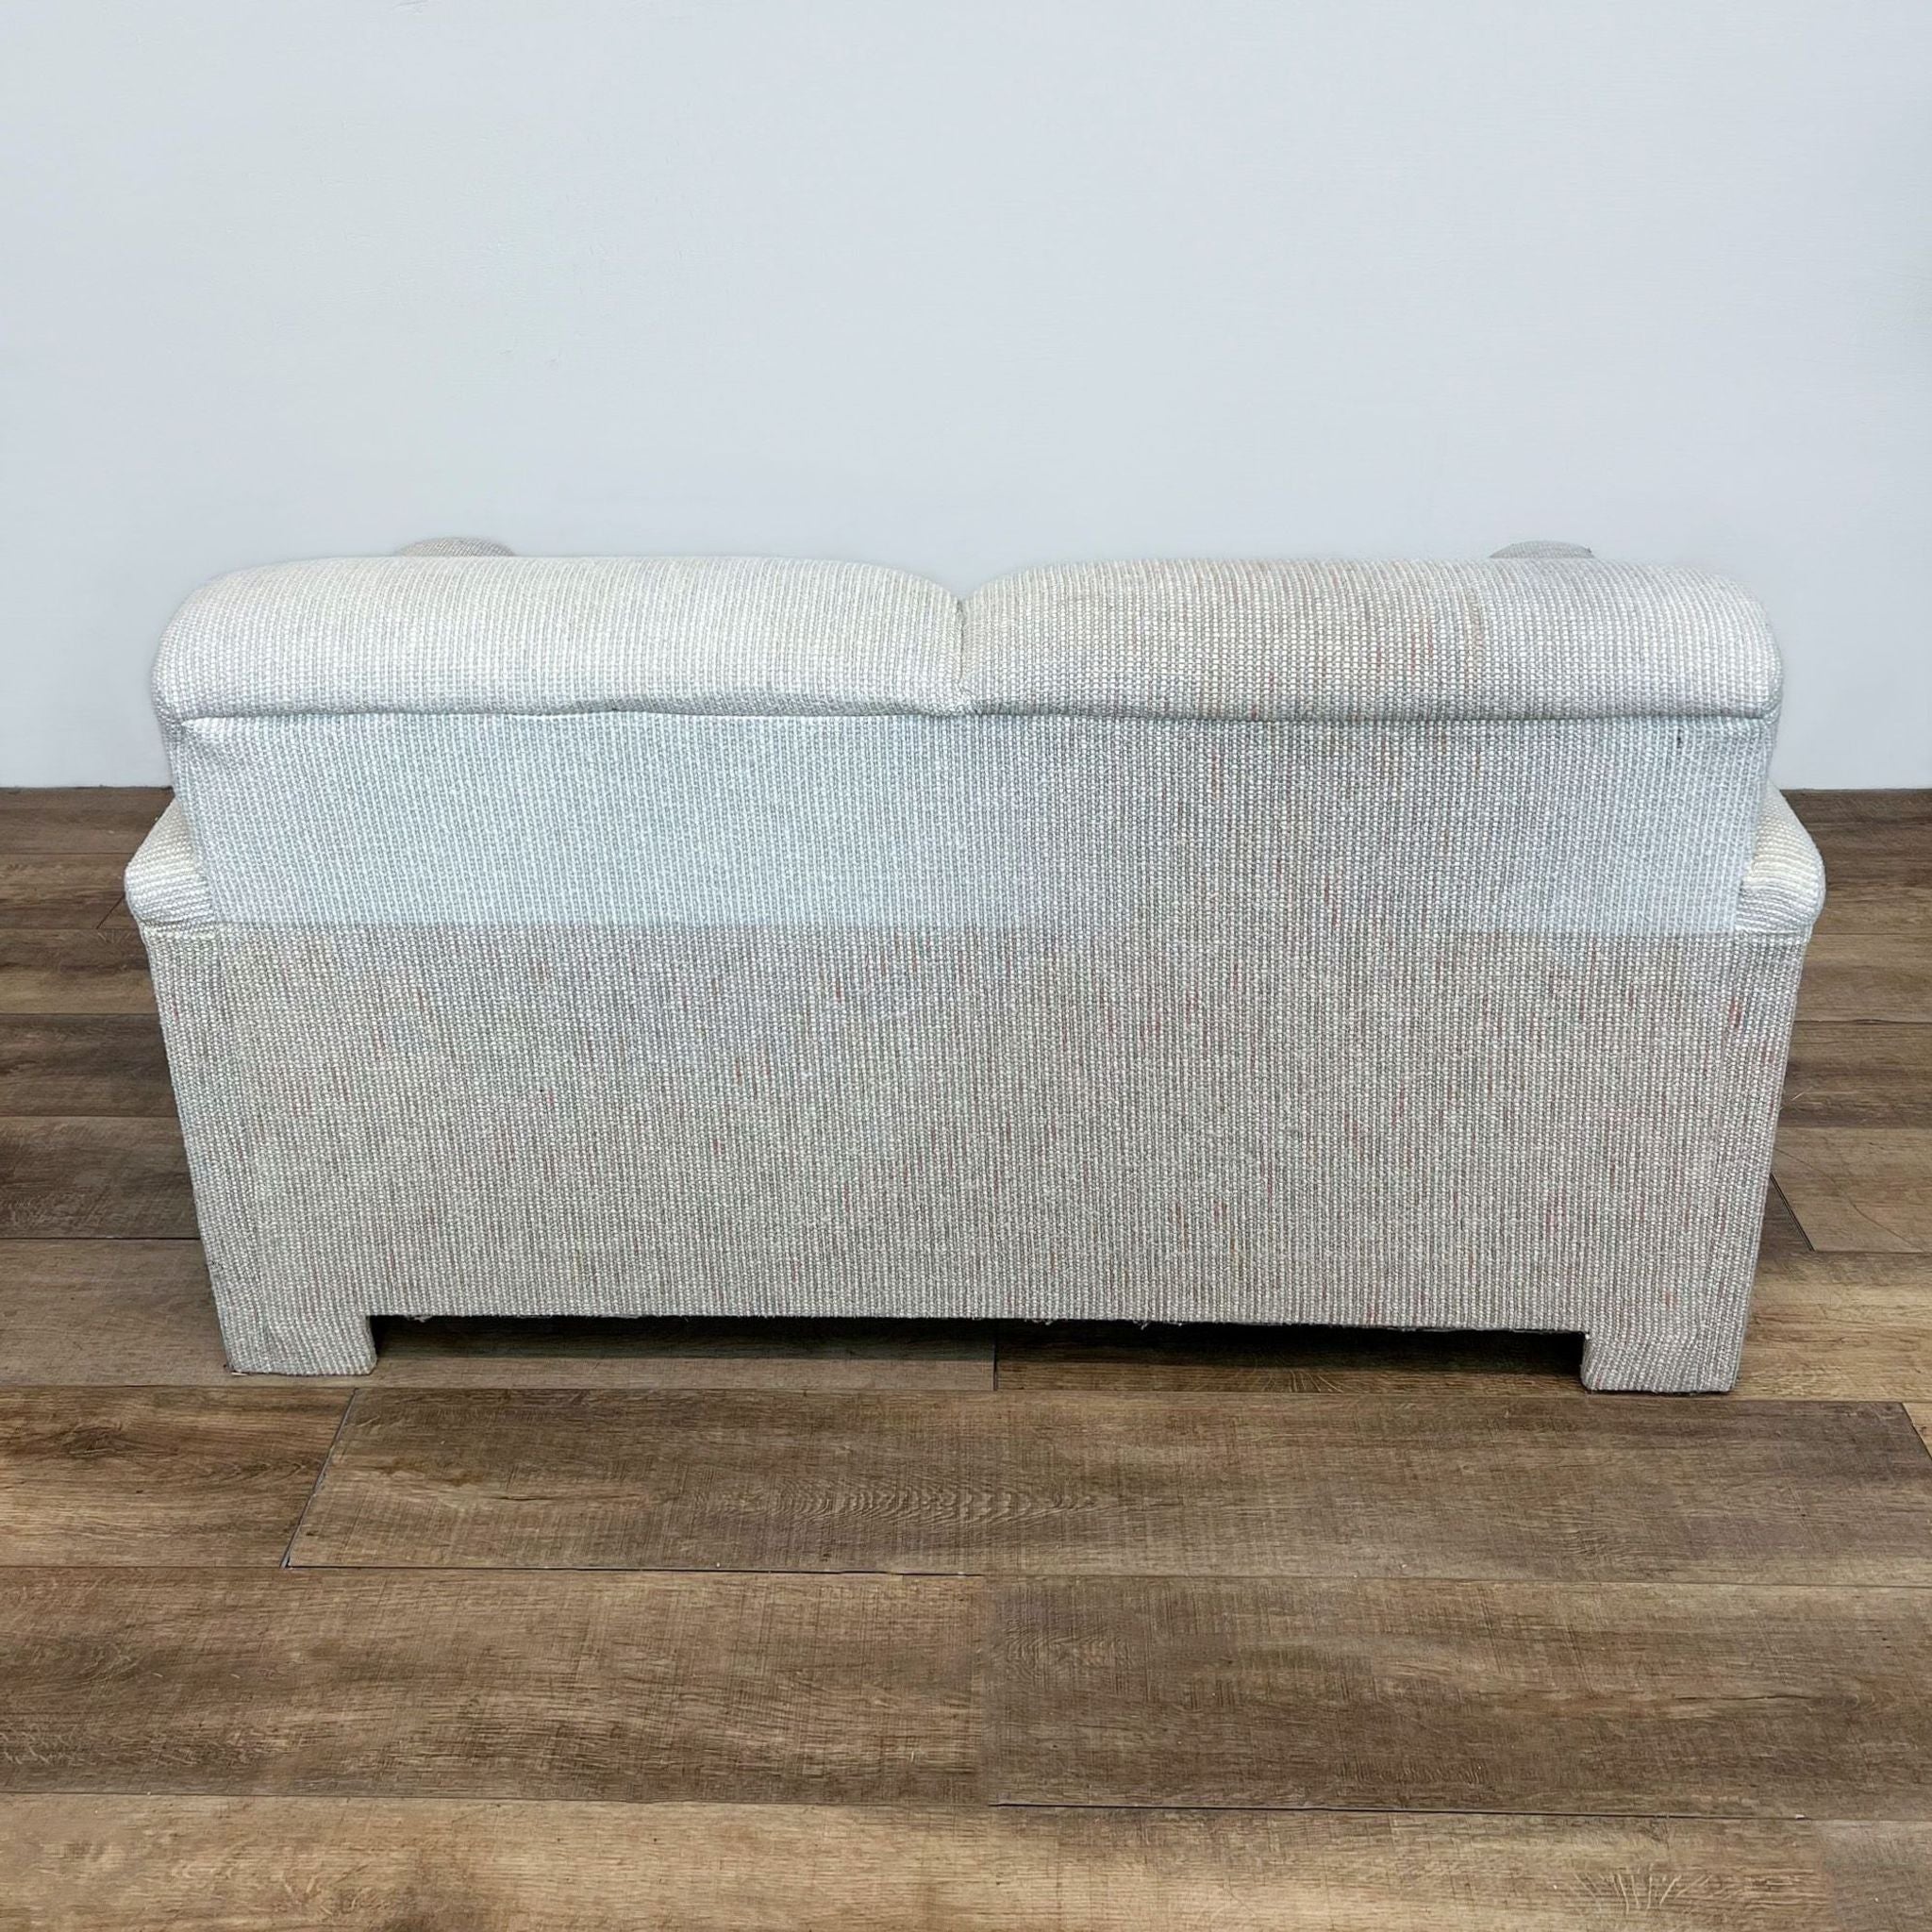 3. Rear perspective of a tweed upholstered Reperch loveseat with a straight back design, standing on a laminate floor.